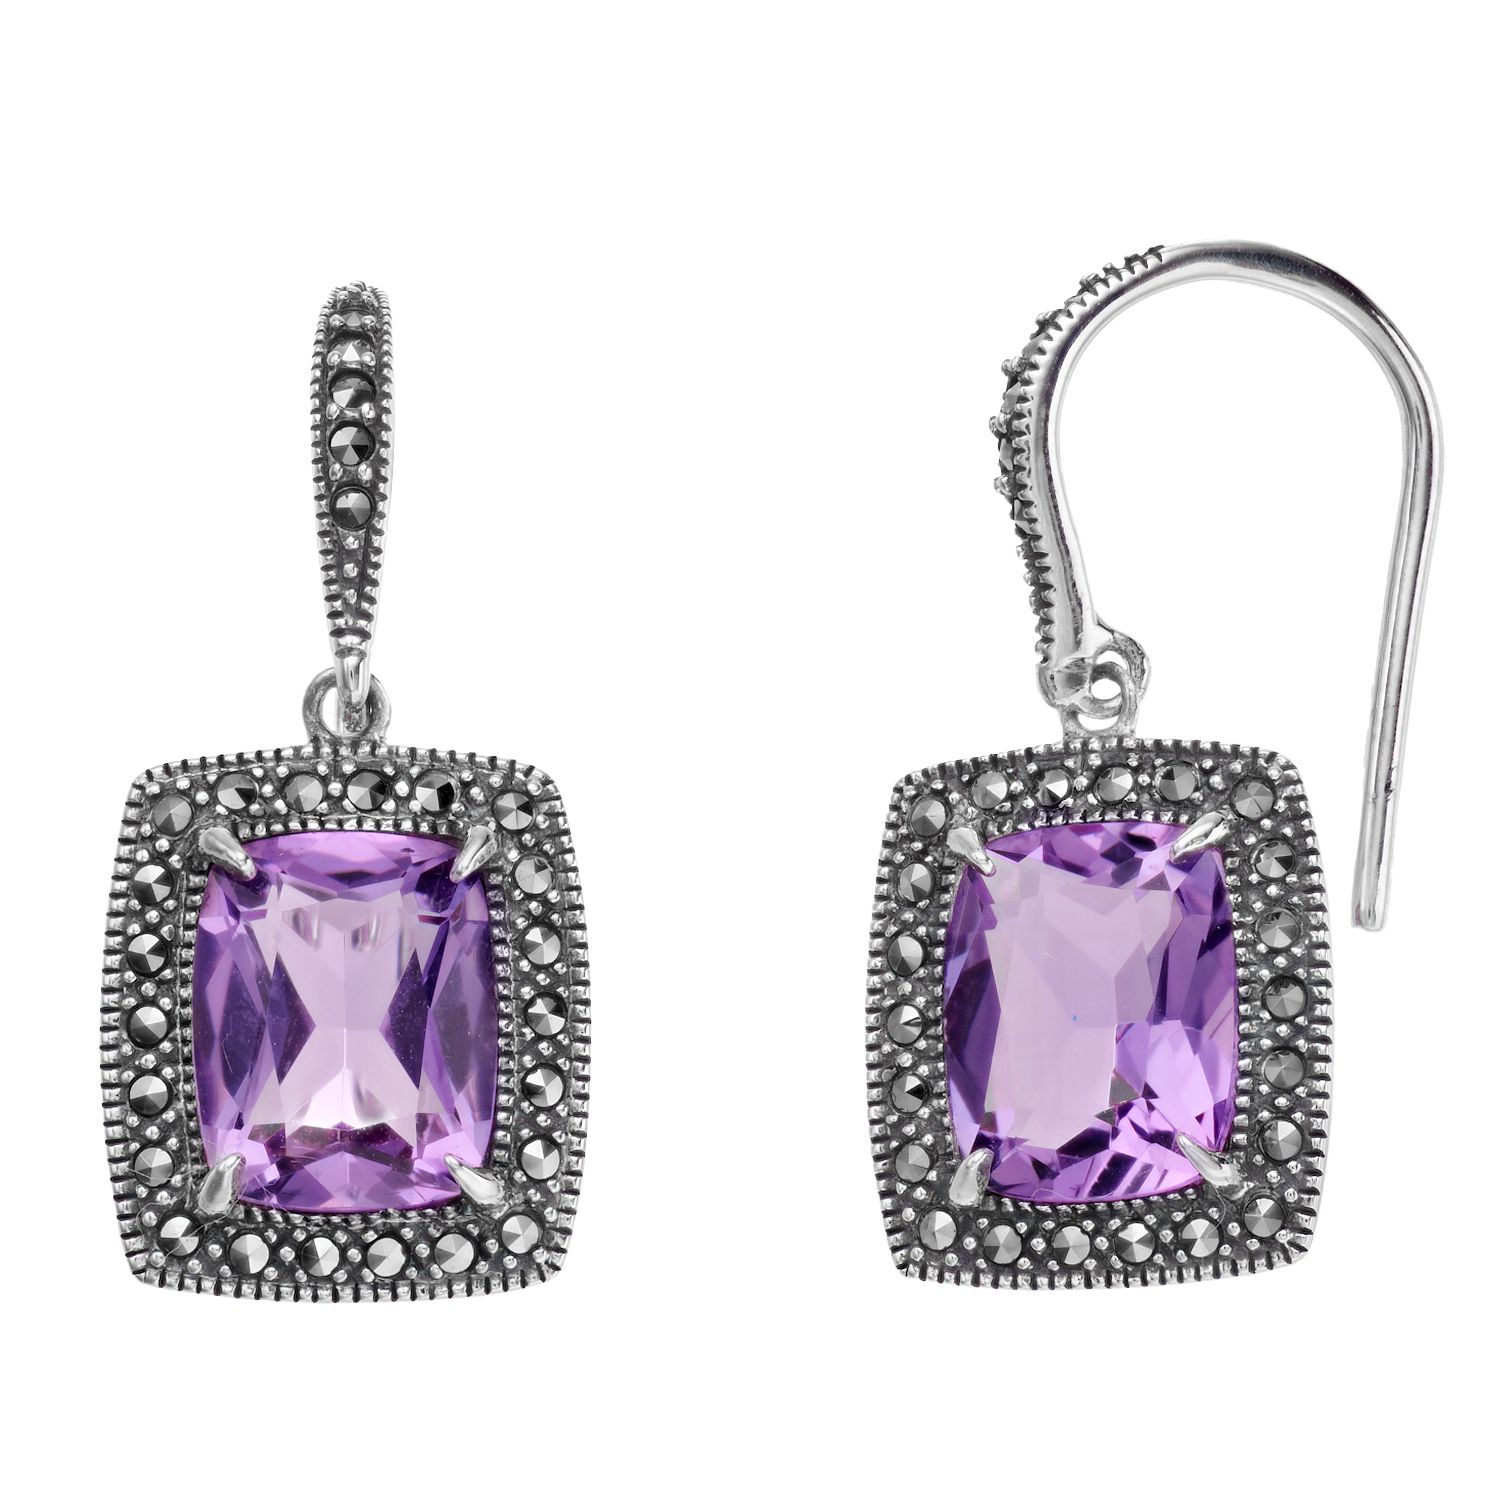 Image for Lavish by TJM Sterling Silver Lab-Created Amethyst & Marcasite Cushion Earrings at Kohl's.